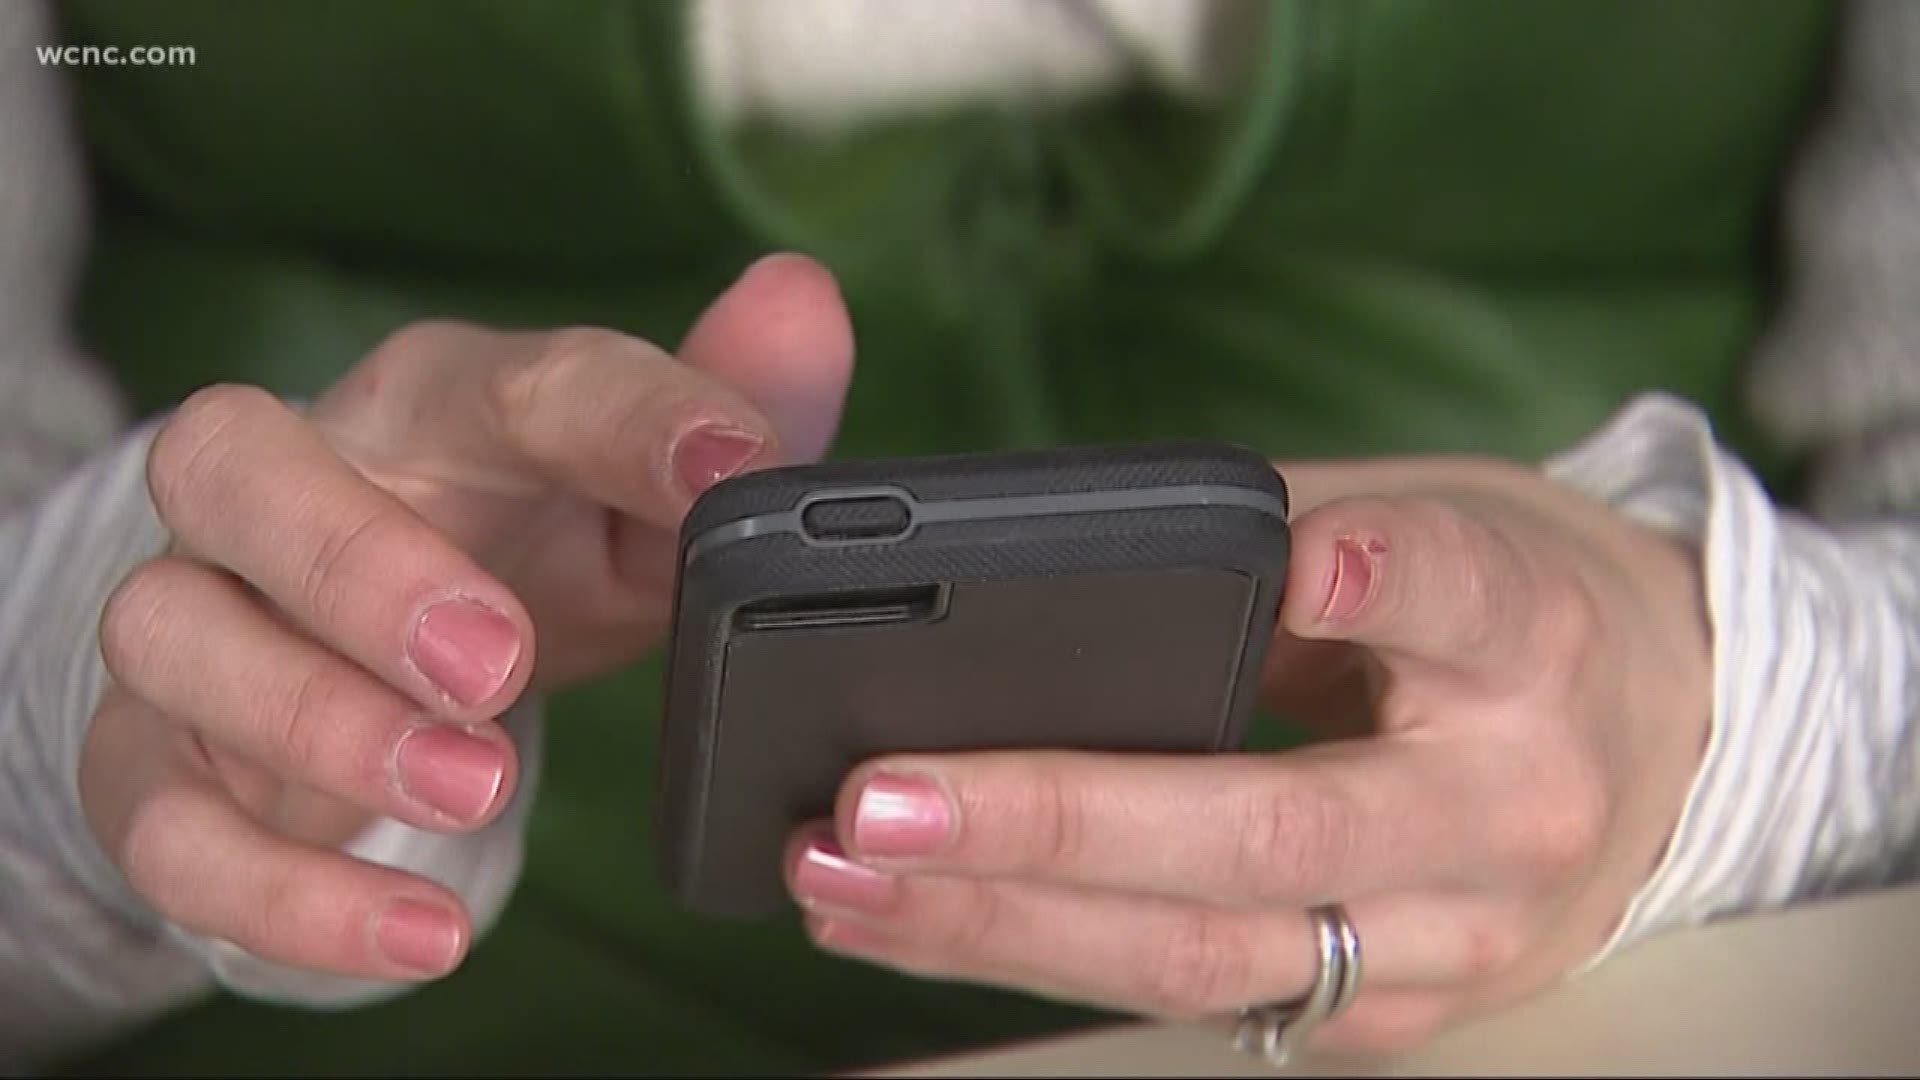 'Text a therapist' gains popularity